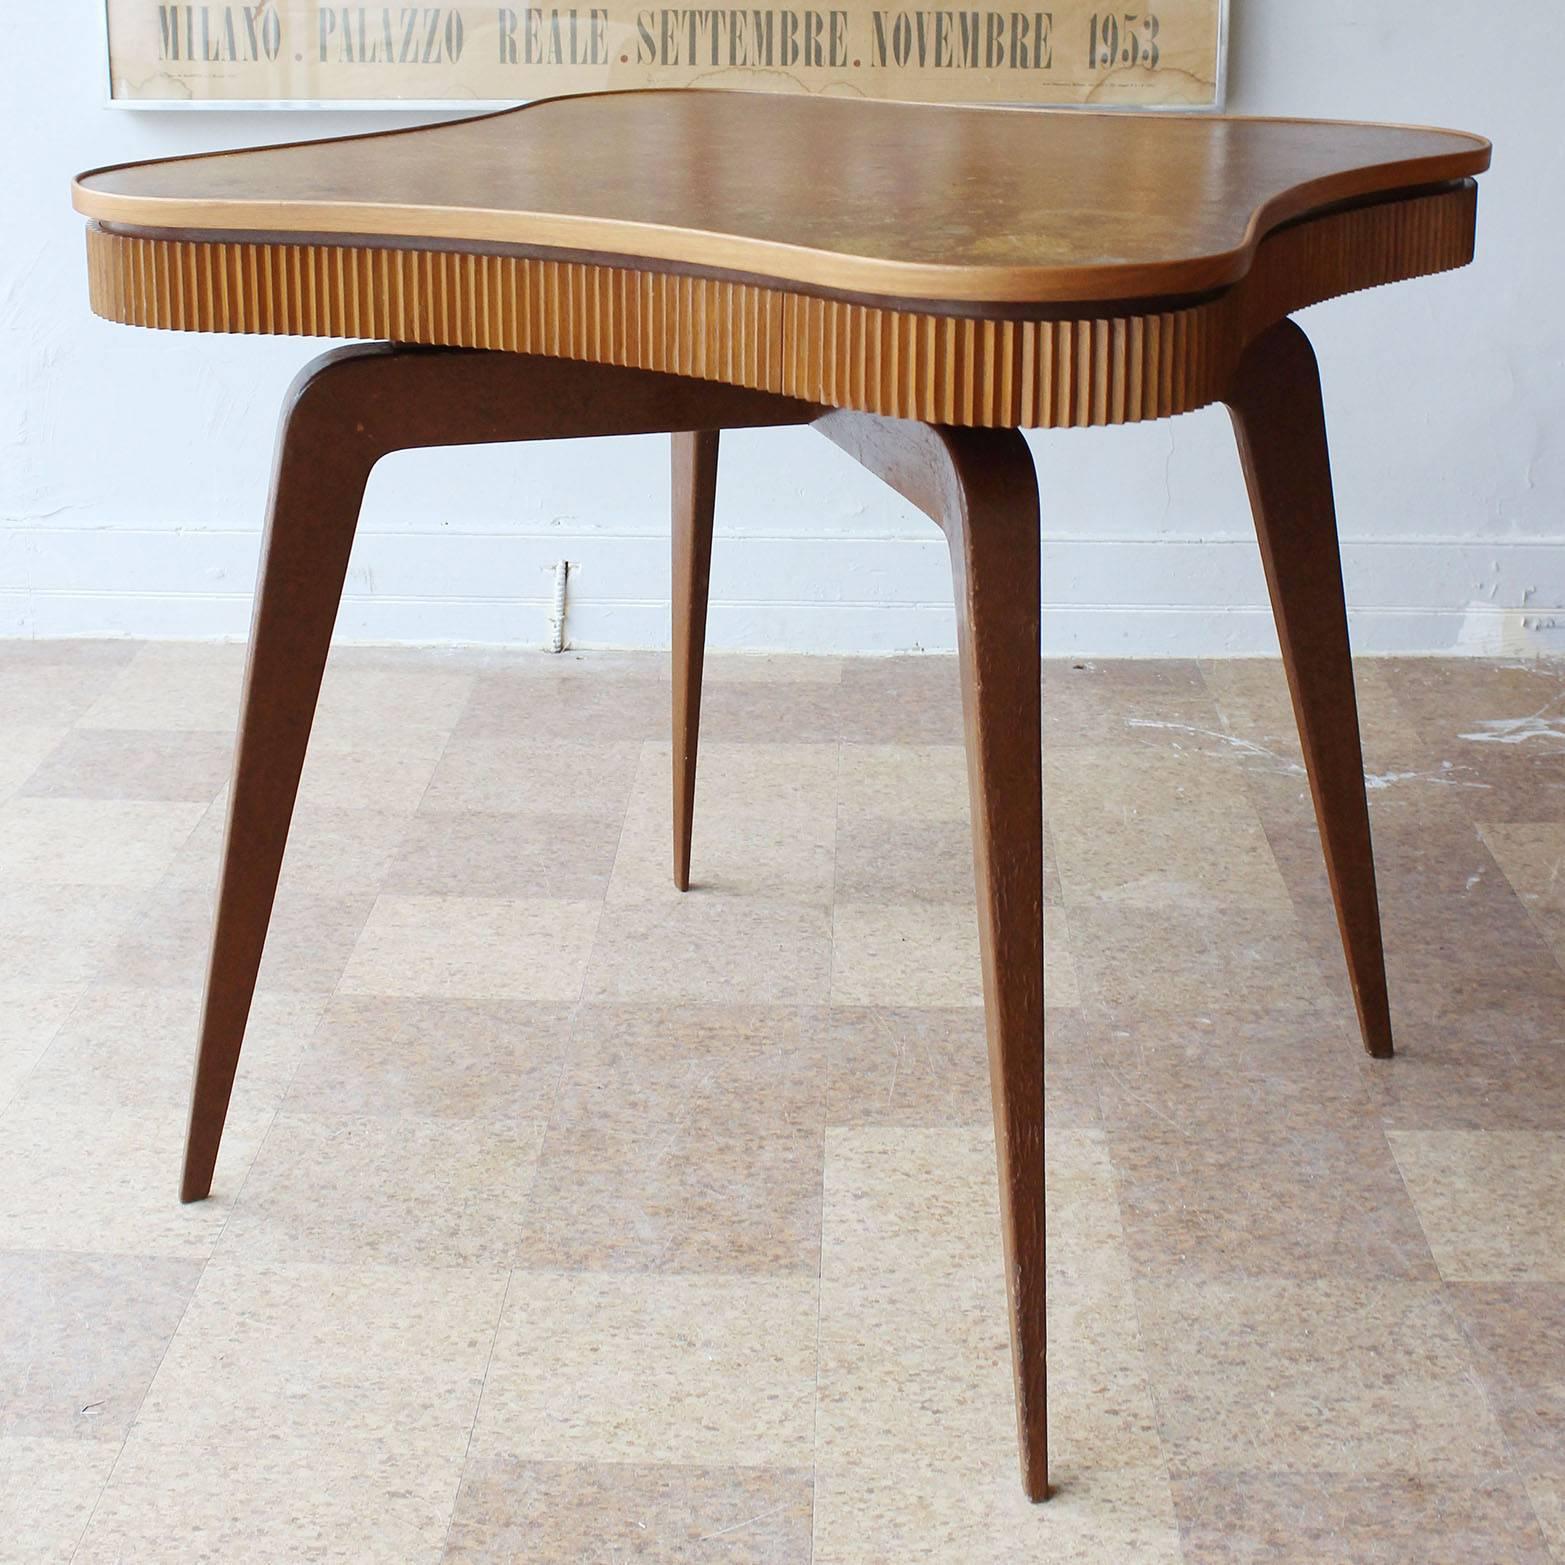 A Mid-Century wood game or dining table with four drawers and ribbed details in the manner of Paolo Buffa.

complementary delivery within 30 miles.